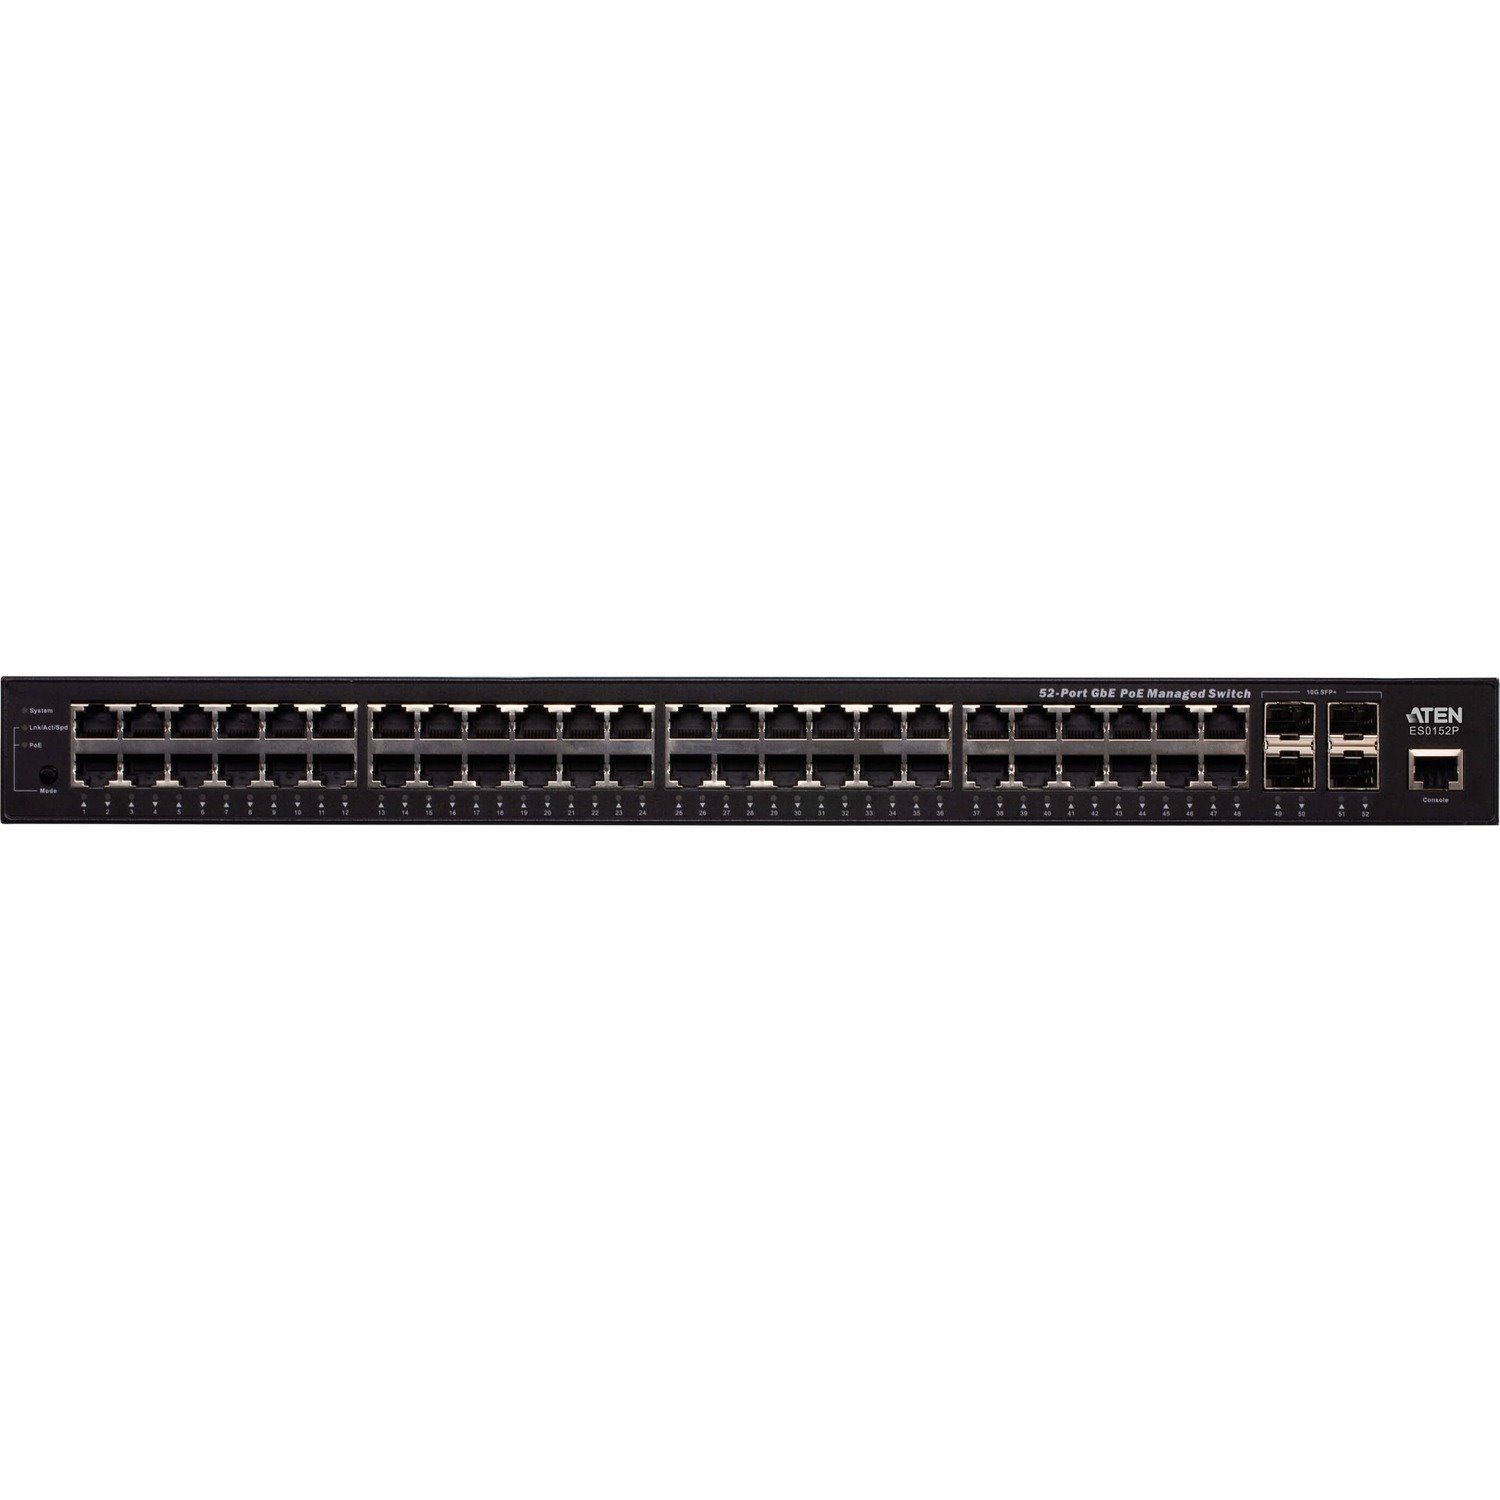 ATEN 52-Port GbE PoE Managed Switch